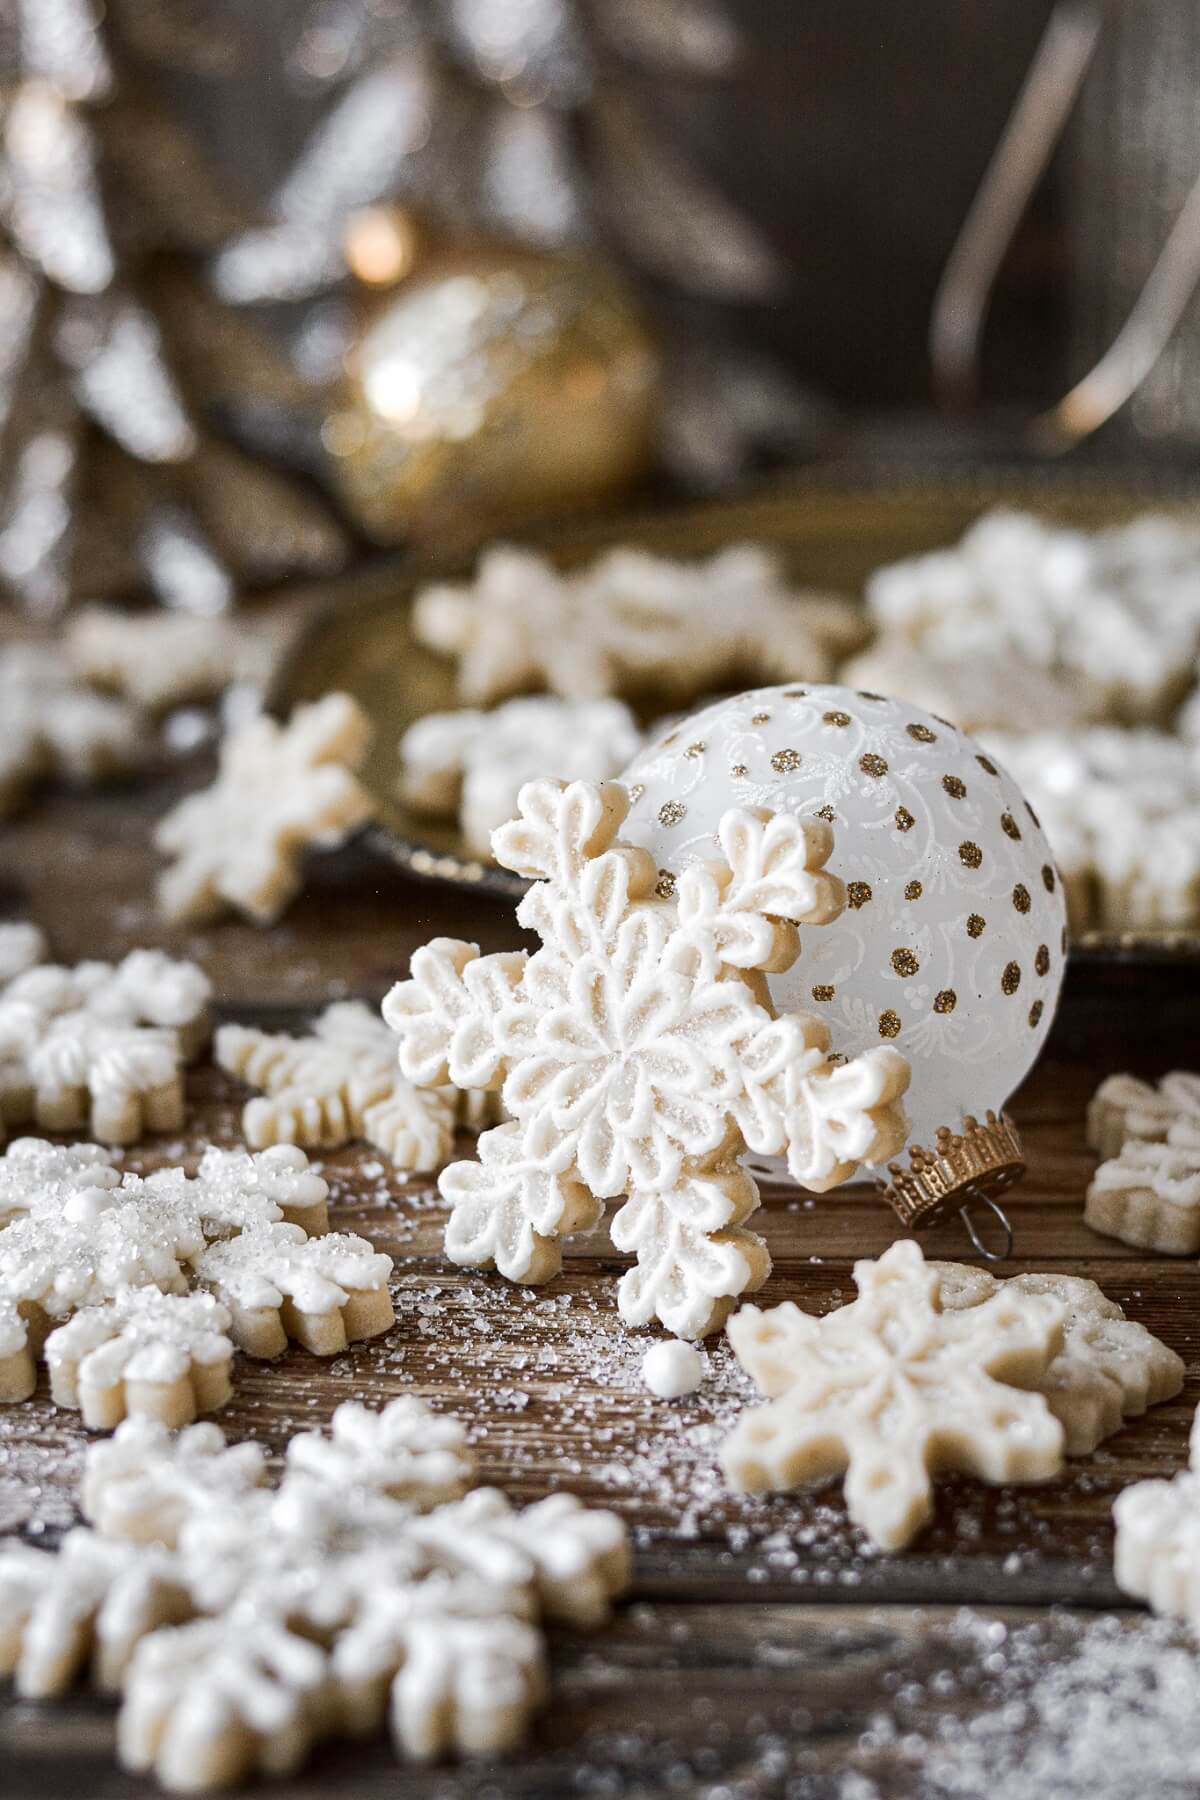 Snowflake sugar cookie resting against a Christmas ornament.